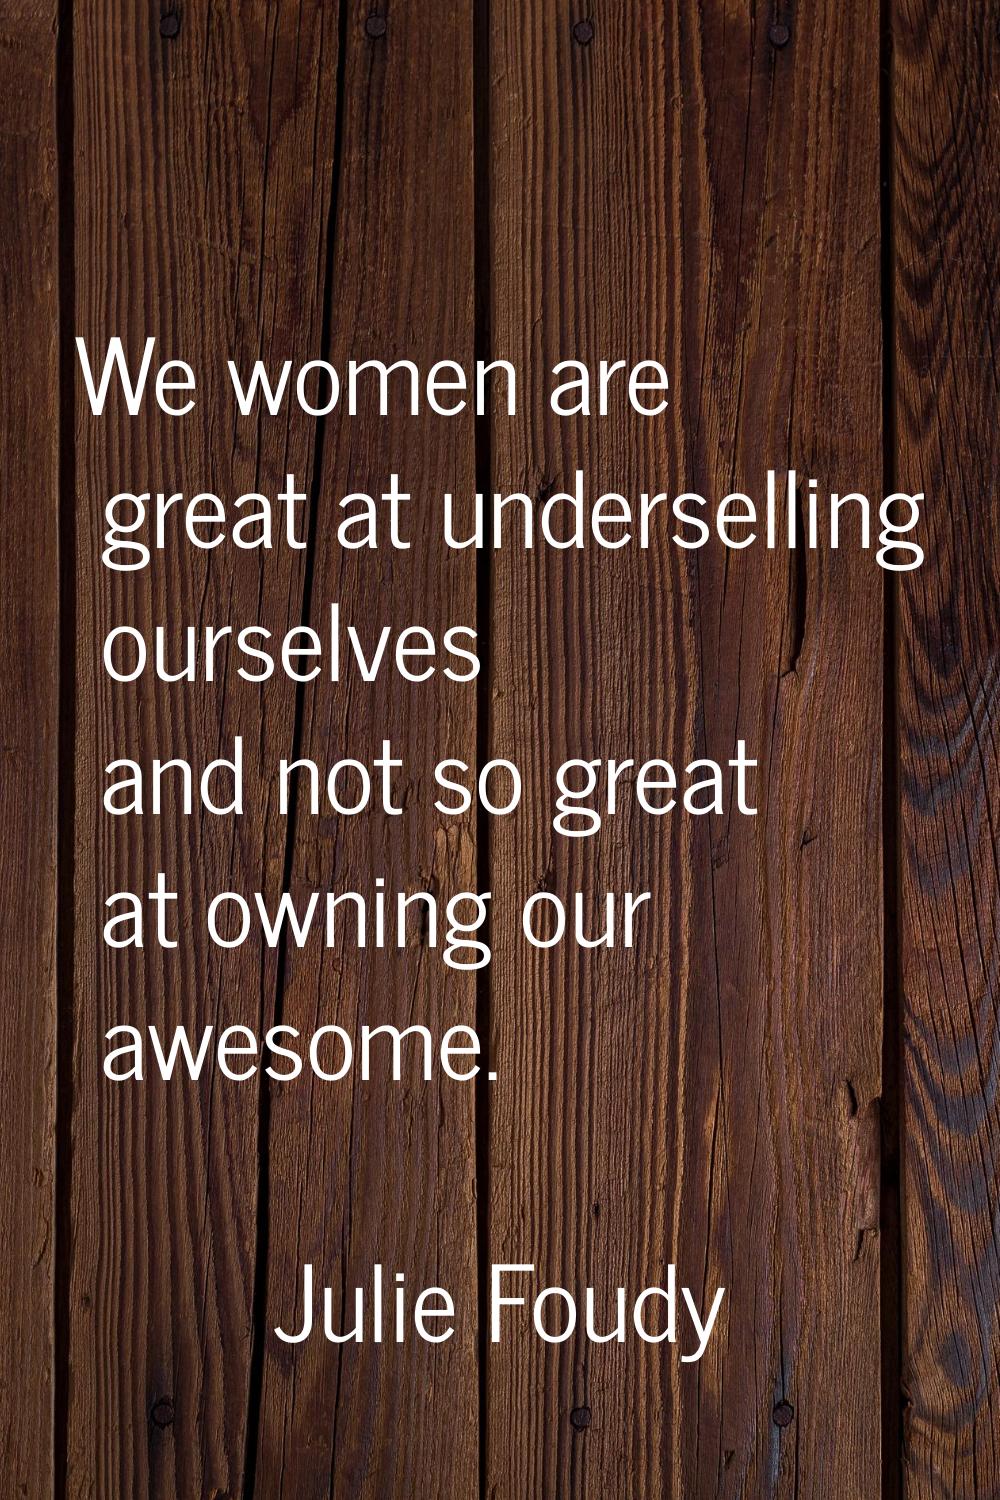 We women are great at underselling ourselves and not so great at owning our awesome.